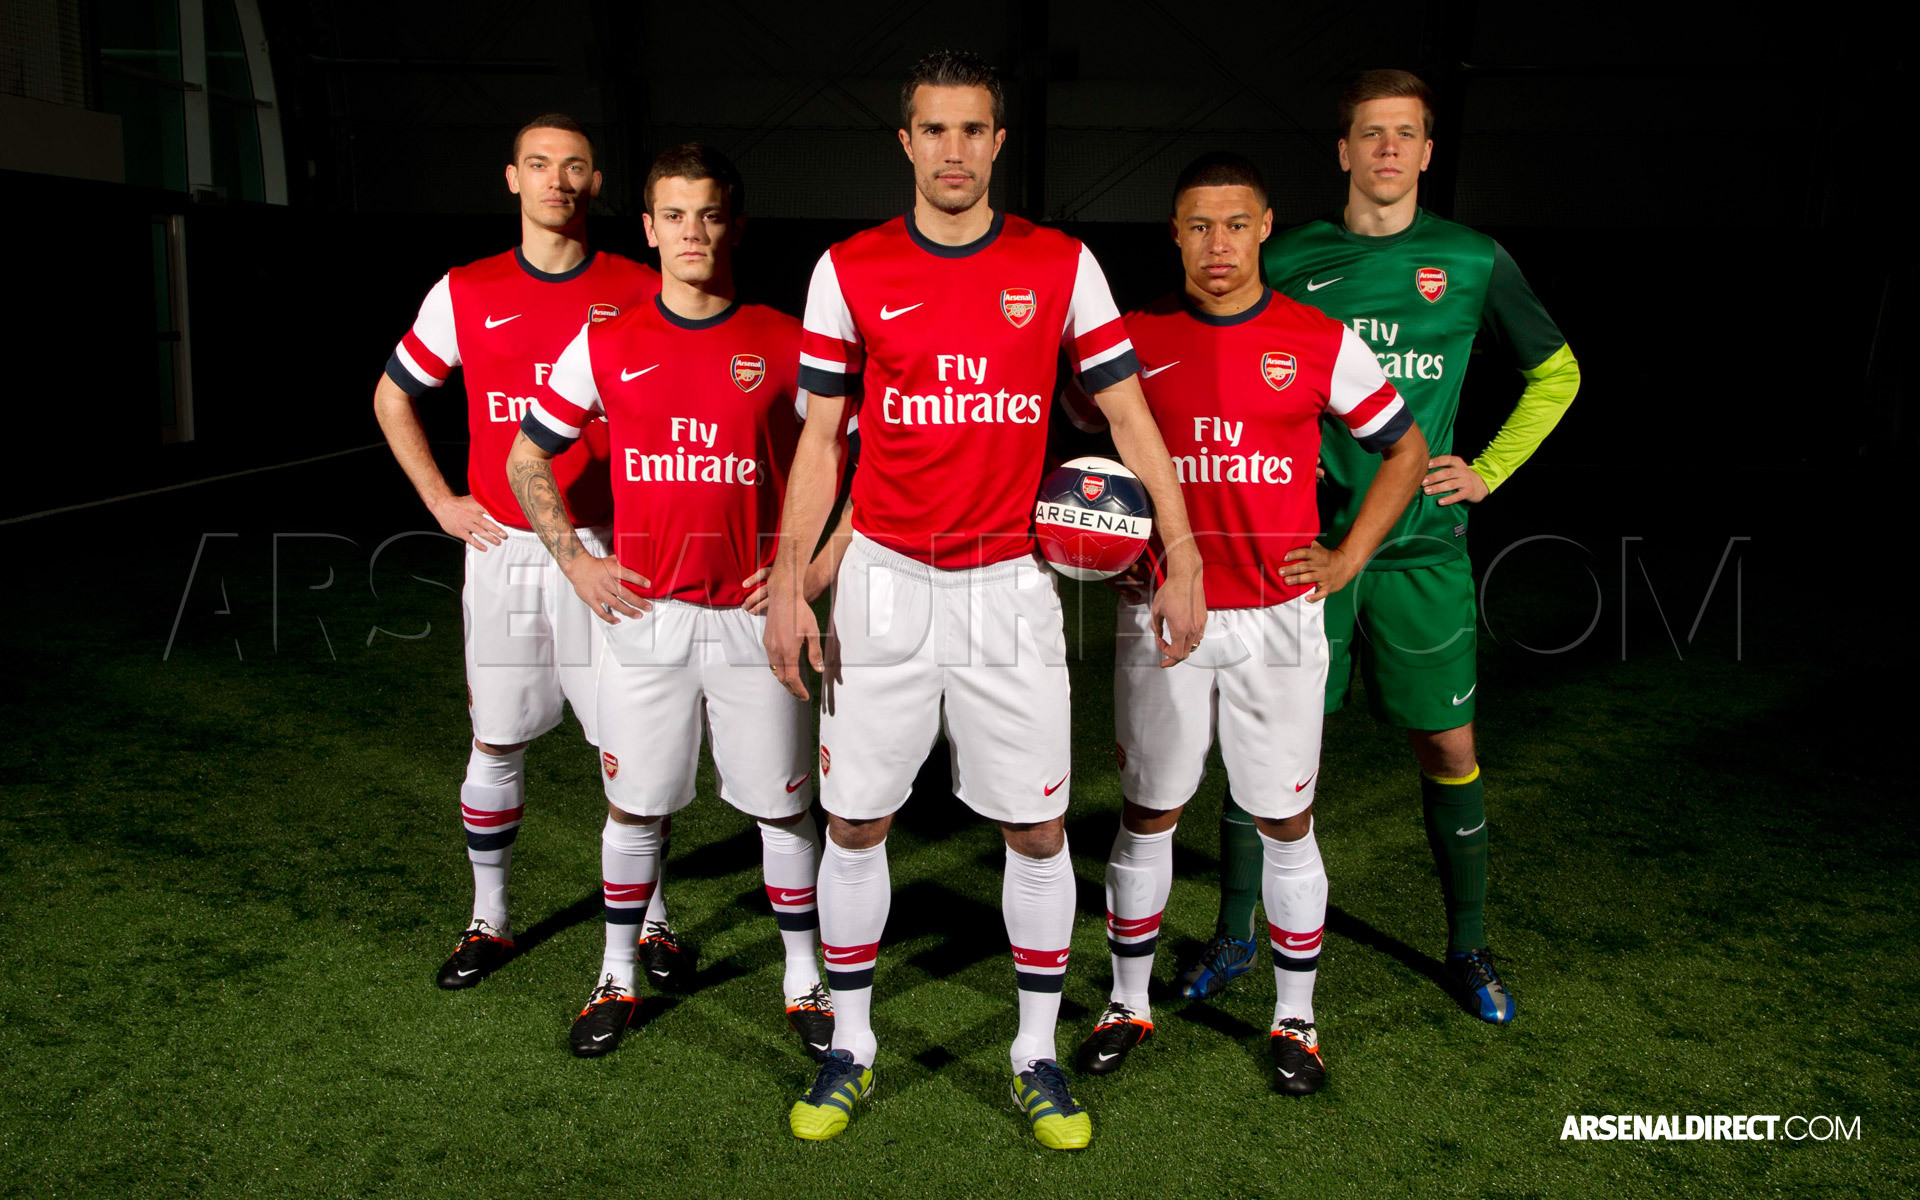 Arsenal Famous Football Club Wallpaper And Image